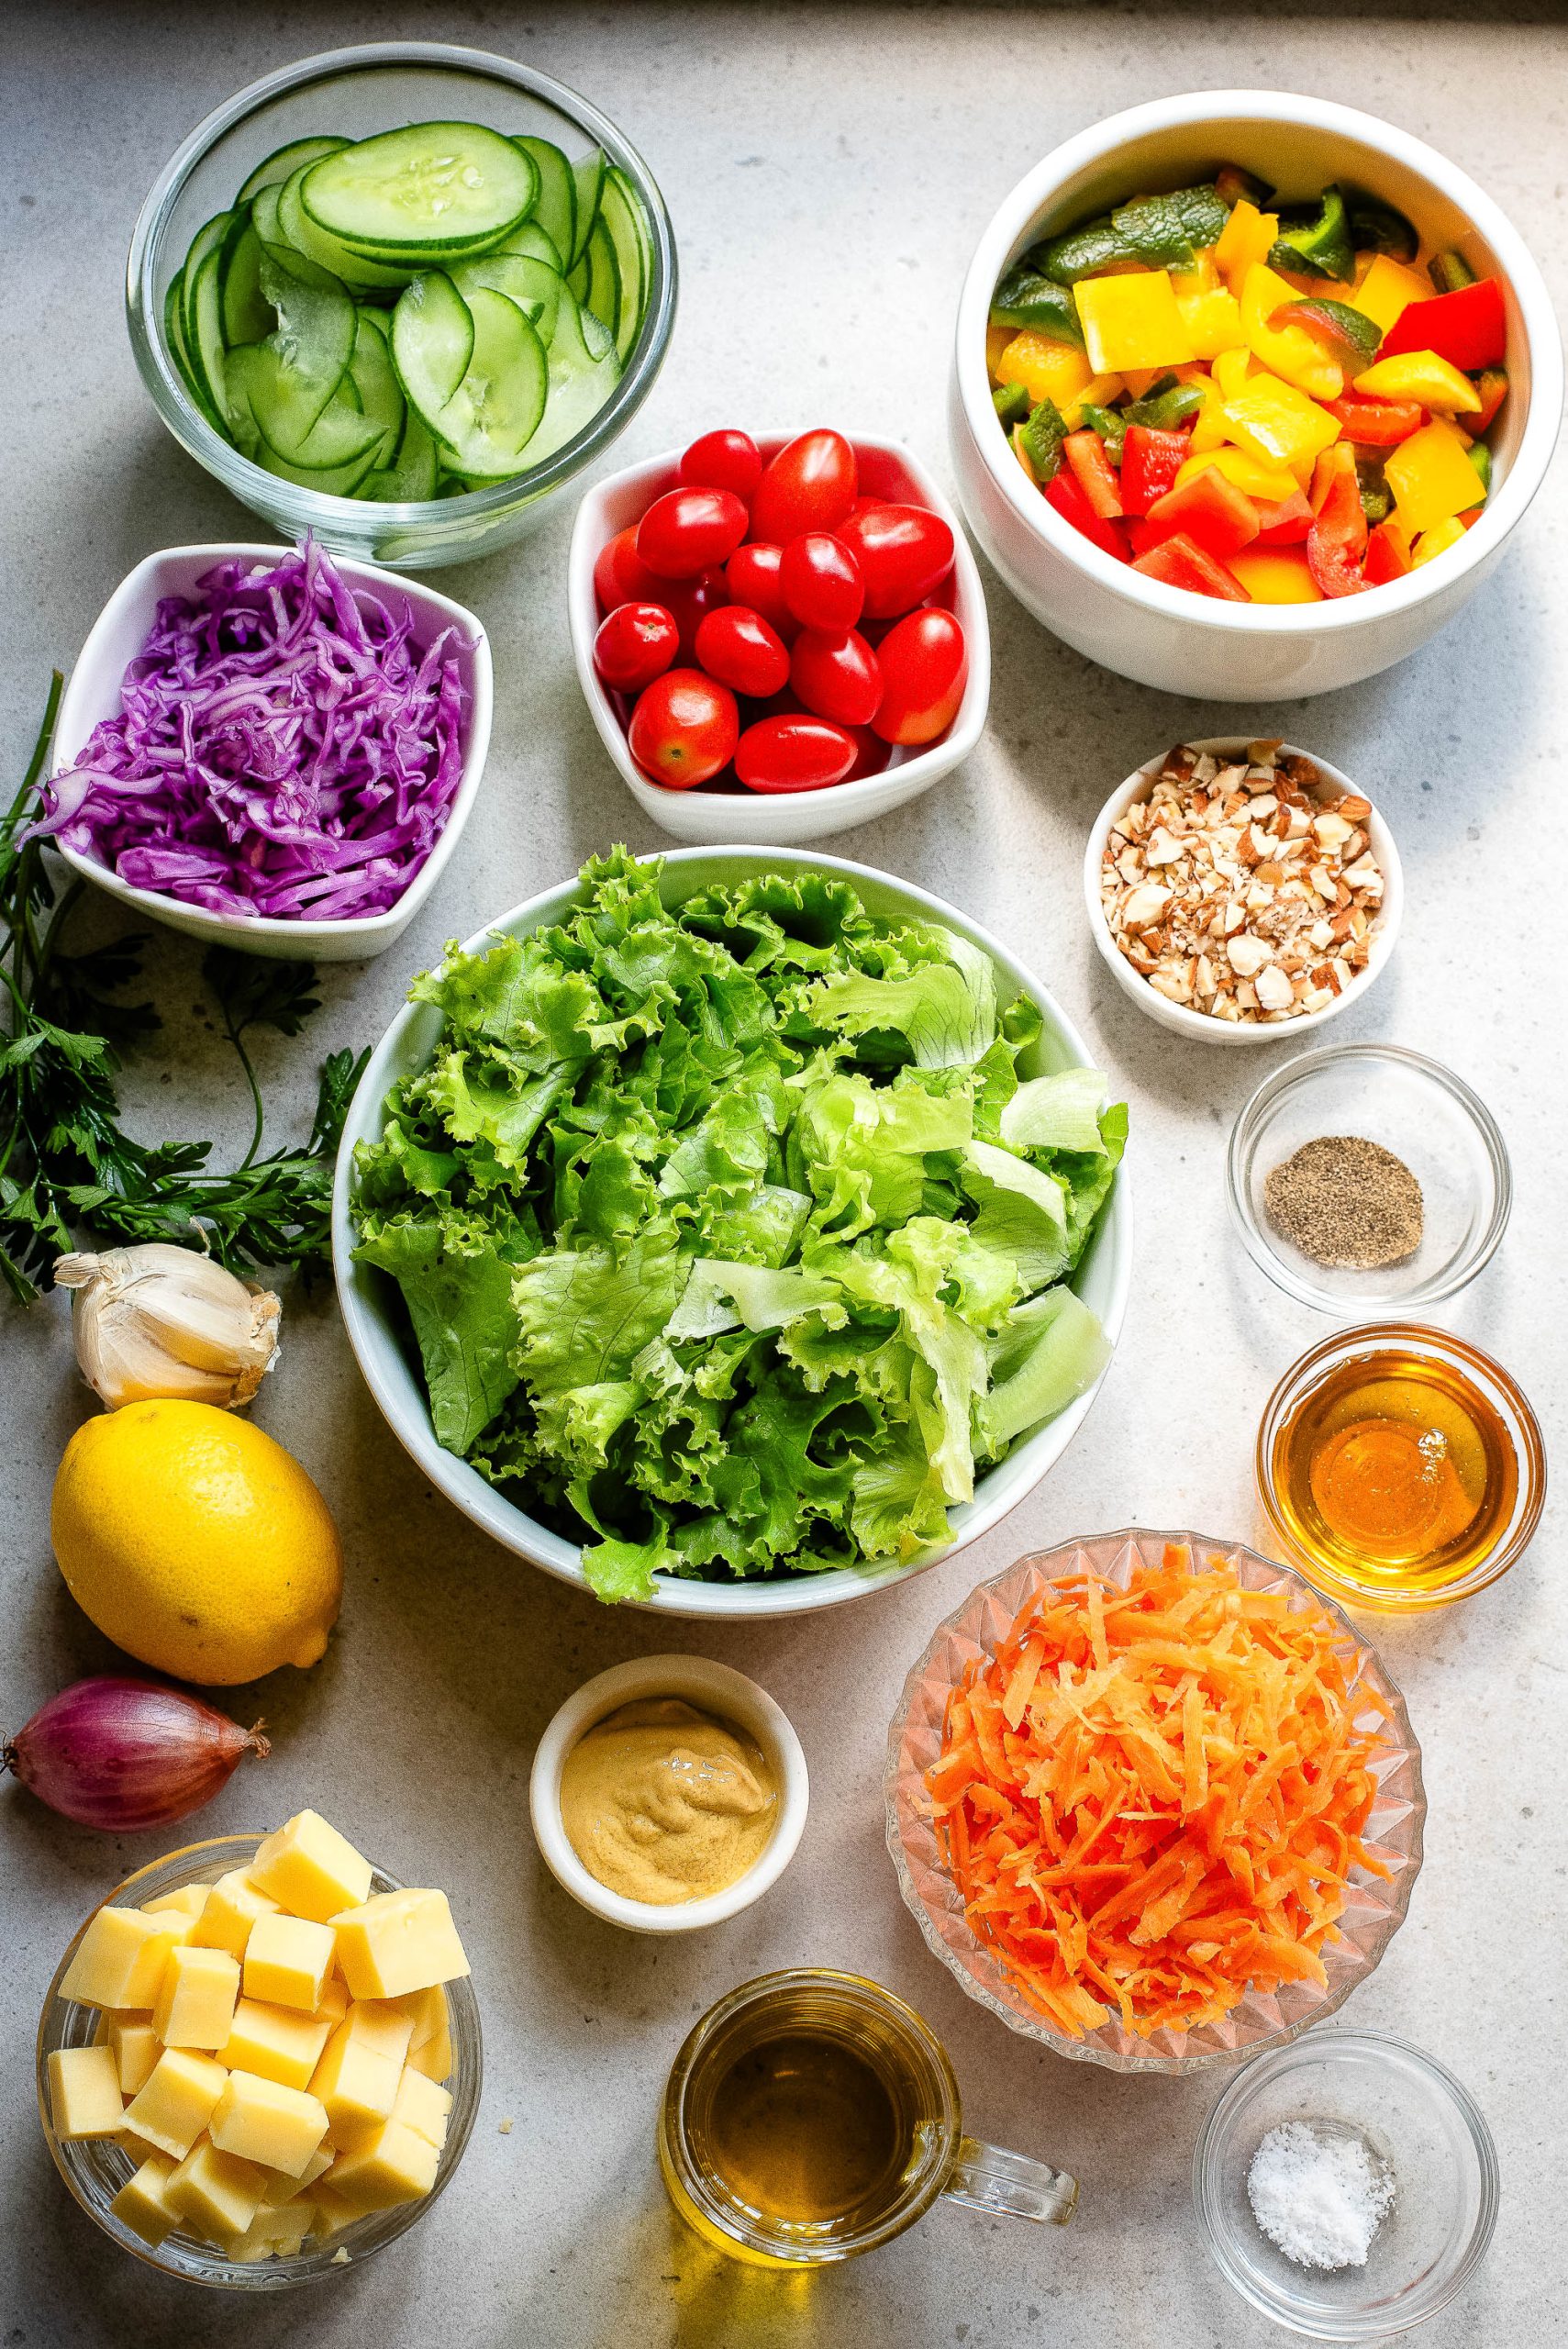 An assortment of fresh ingredients displayed on a kitchen counter, including lettuce, cherry tomatoes, sliced cucumbers, shredded carrots, diced bell peppers, red cabbage, garlic, lemon, and various seasonings.